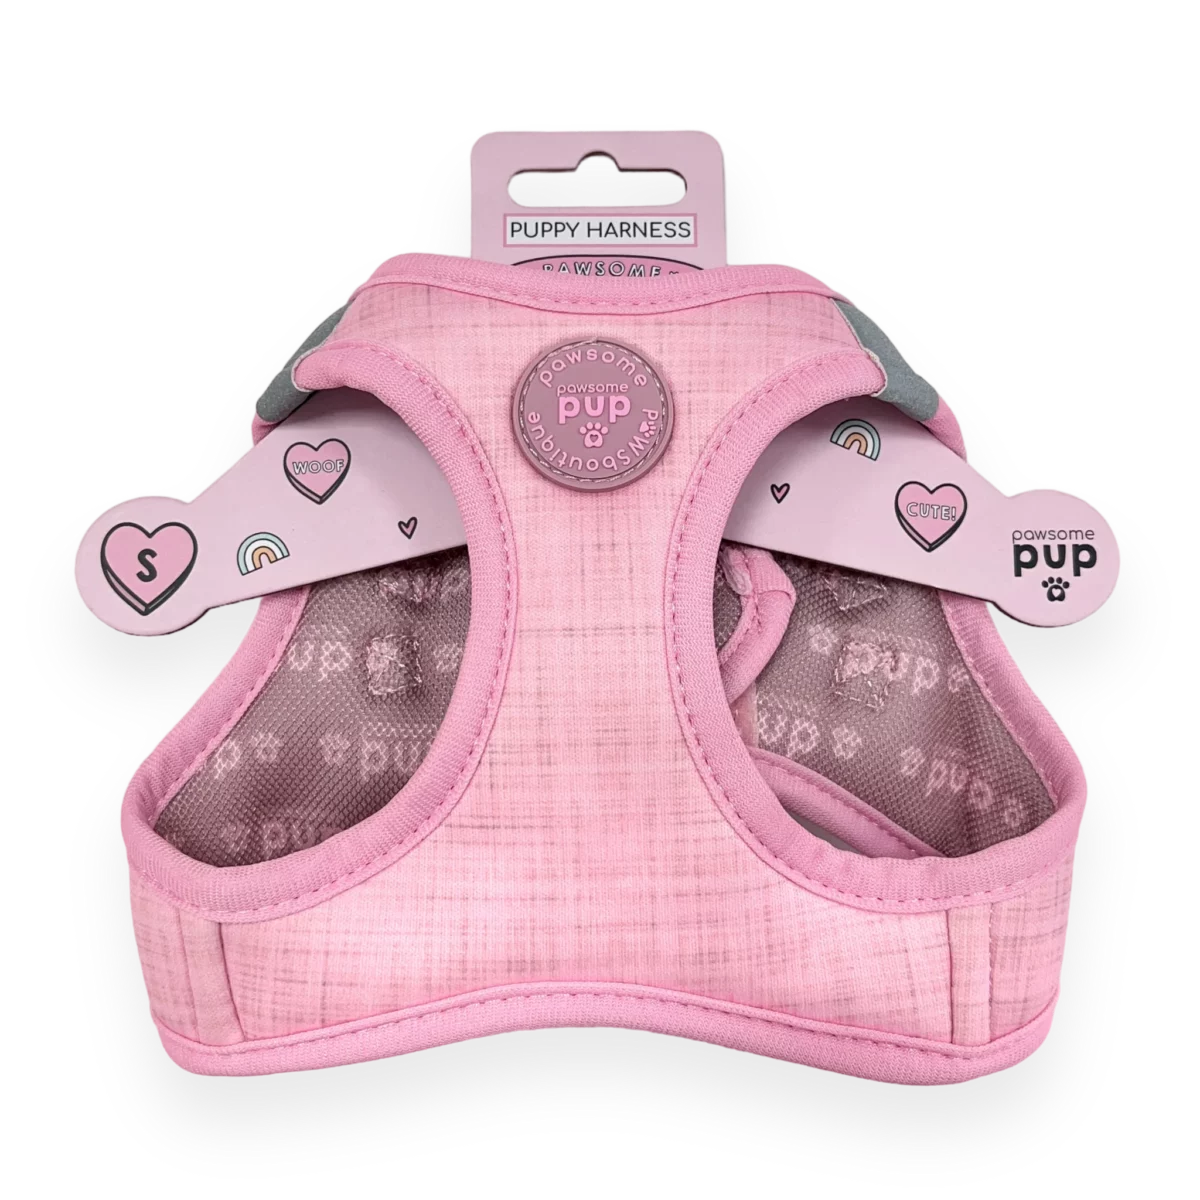 Pawsome Pup Harness - Pink from Catdog Store